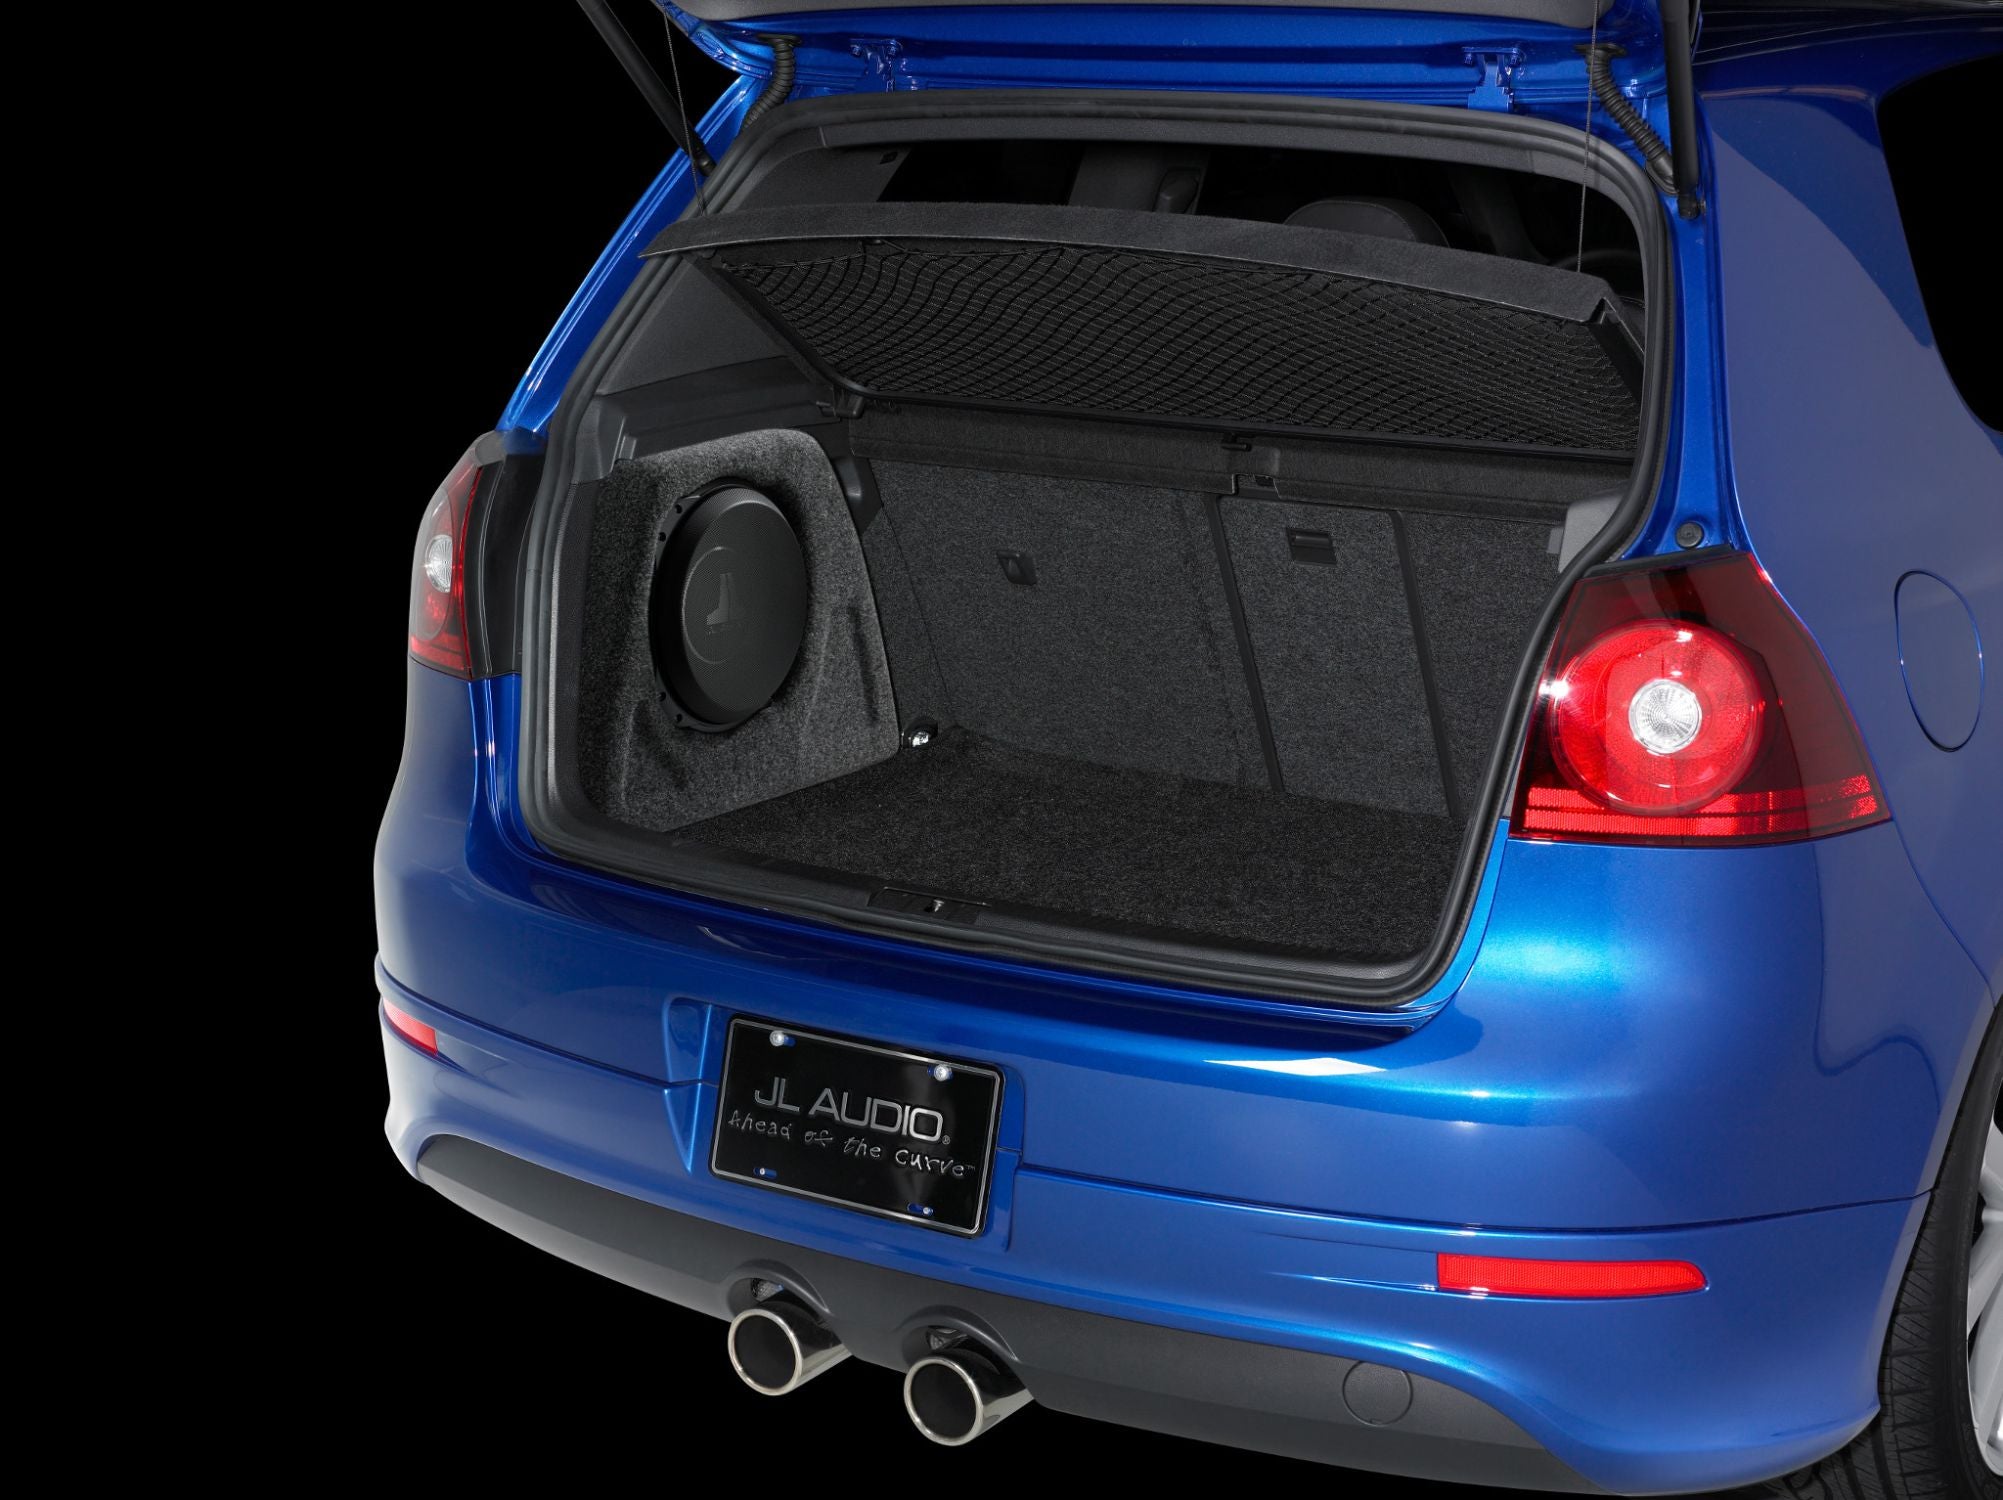 VW GTI Accessories & Parts - Free Shipping